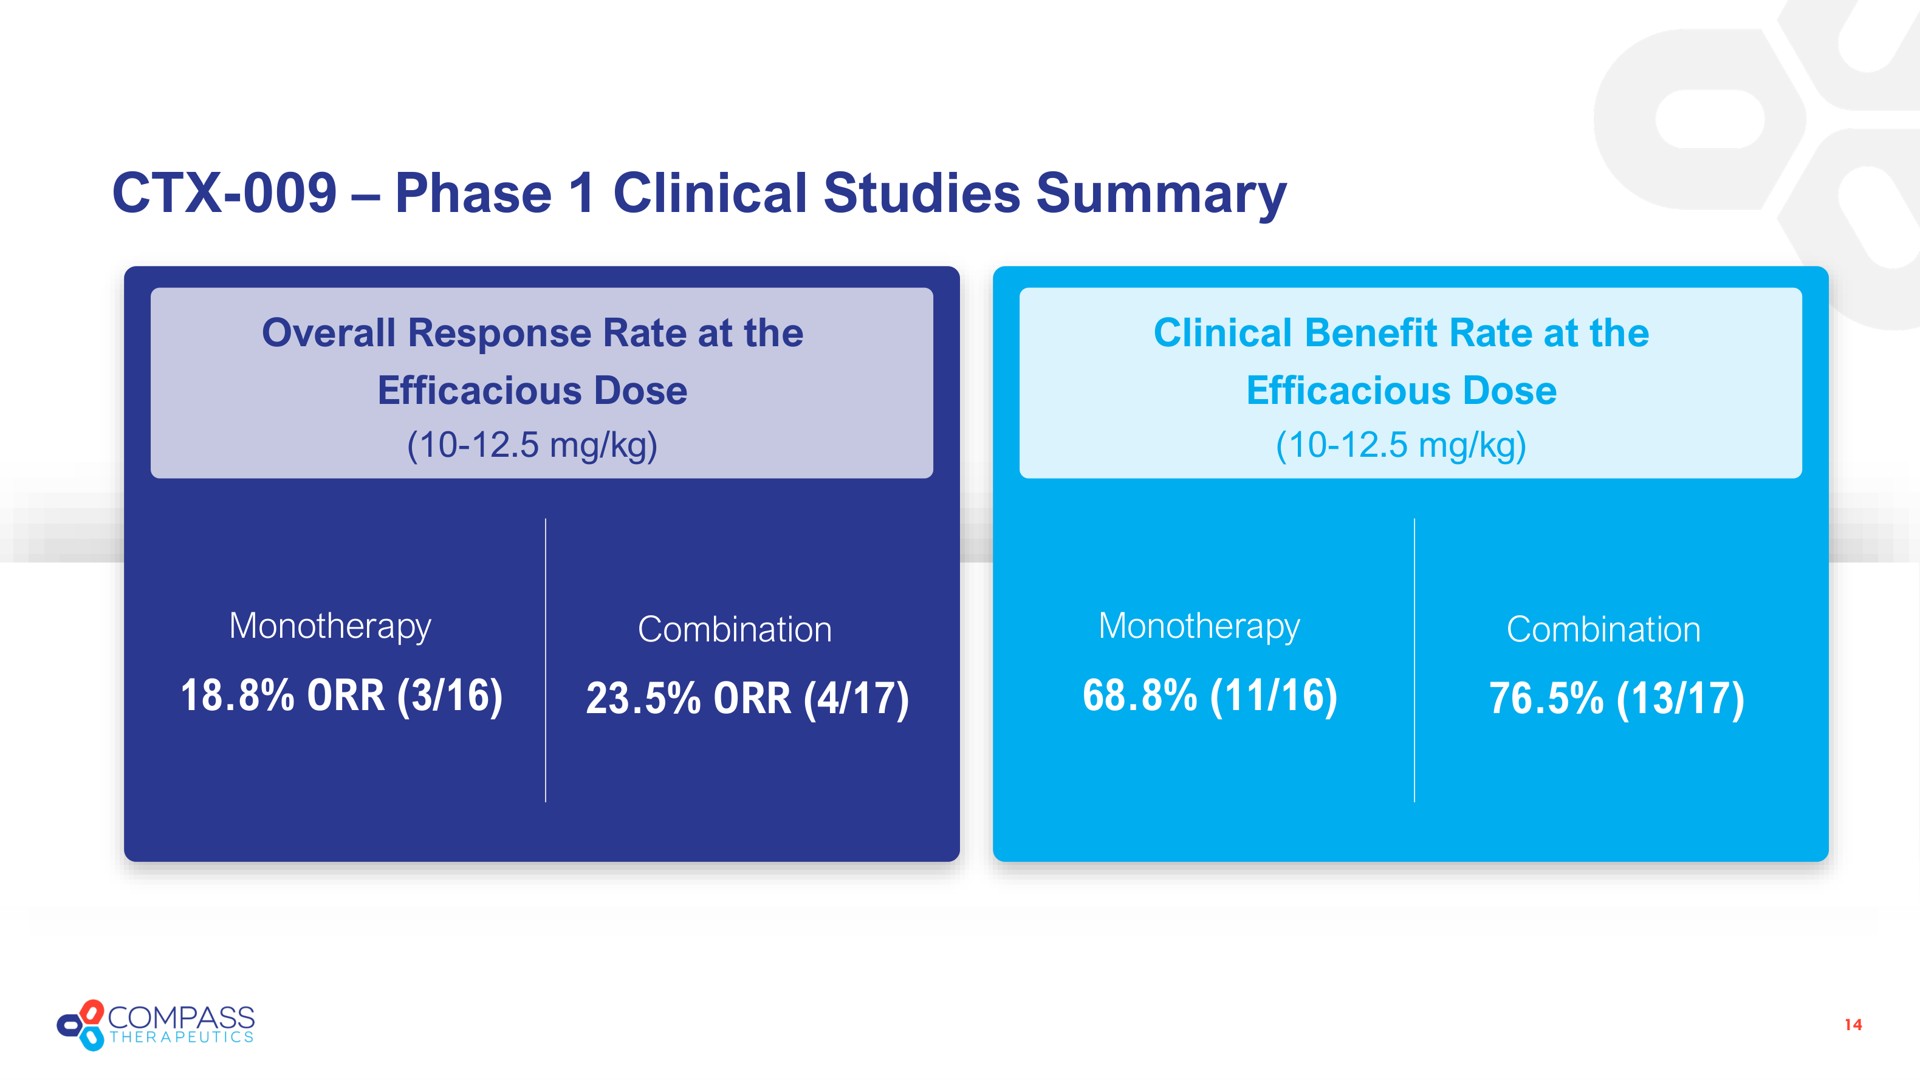 phase clinical studies summary | Compass Therapeutics